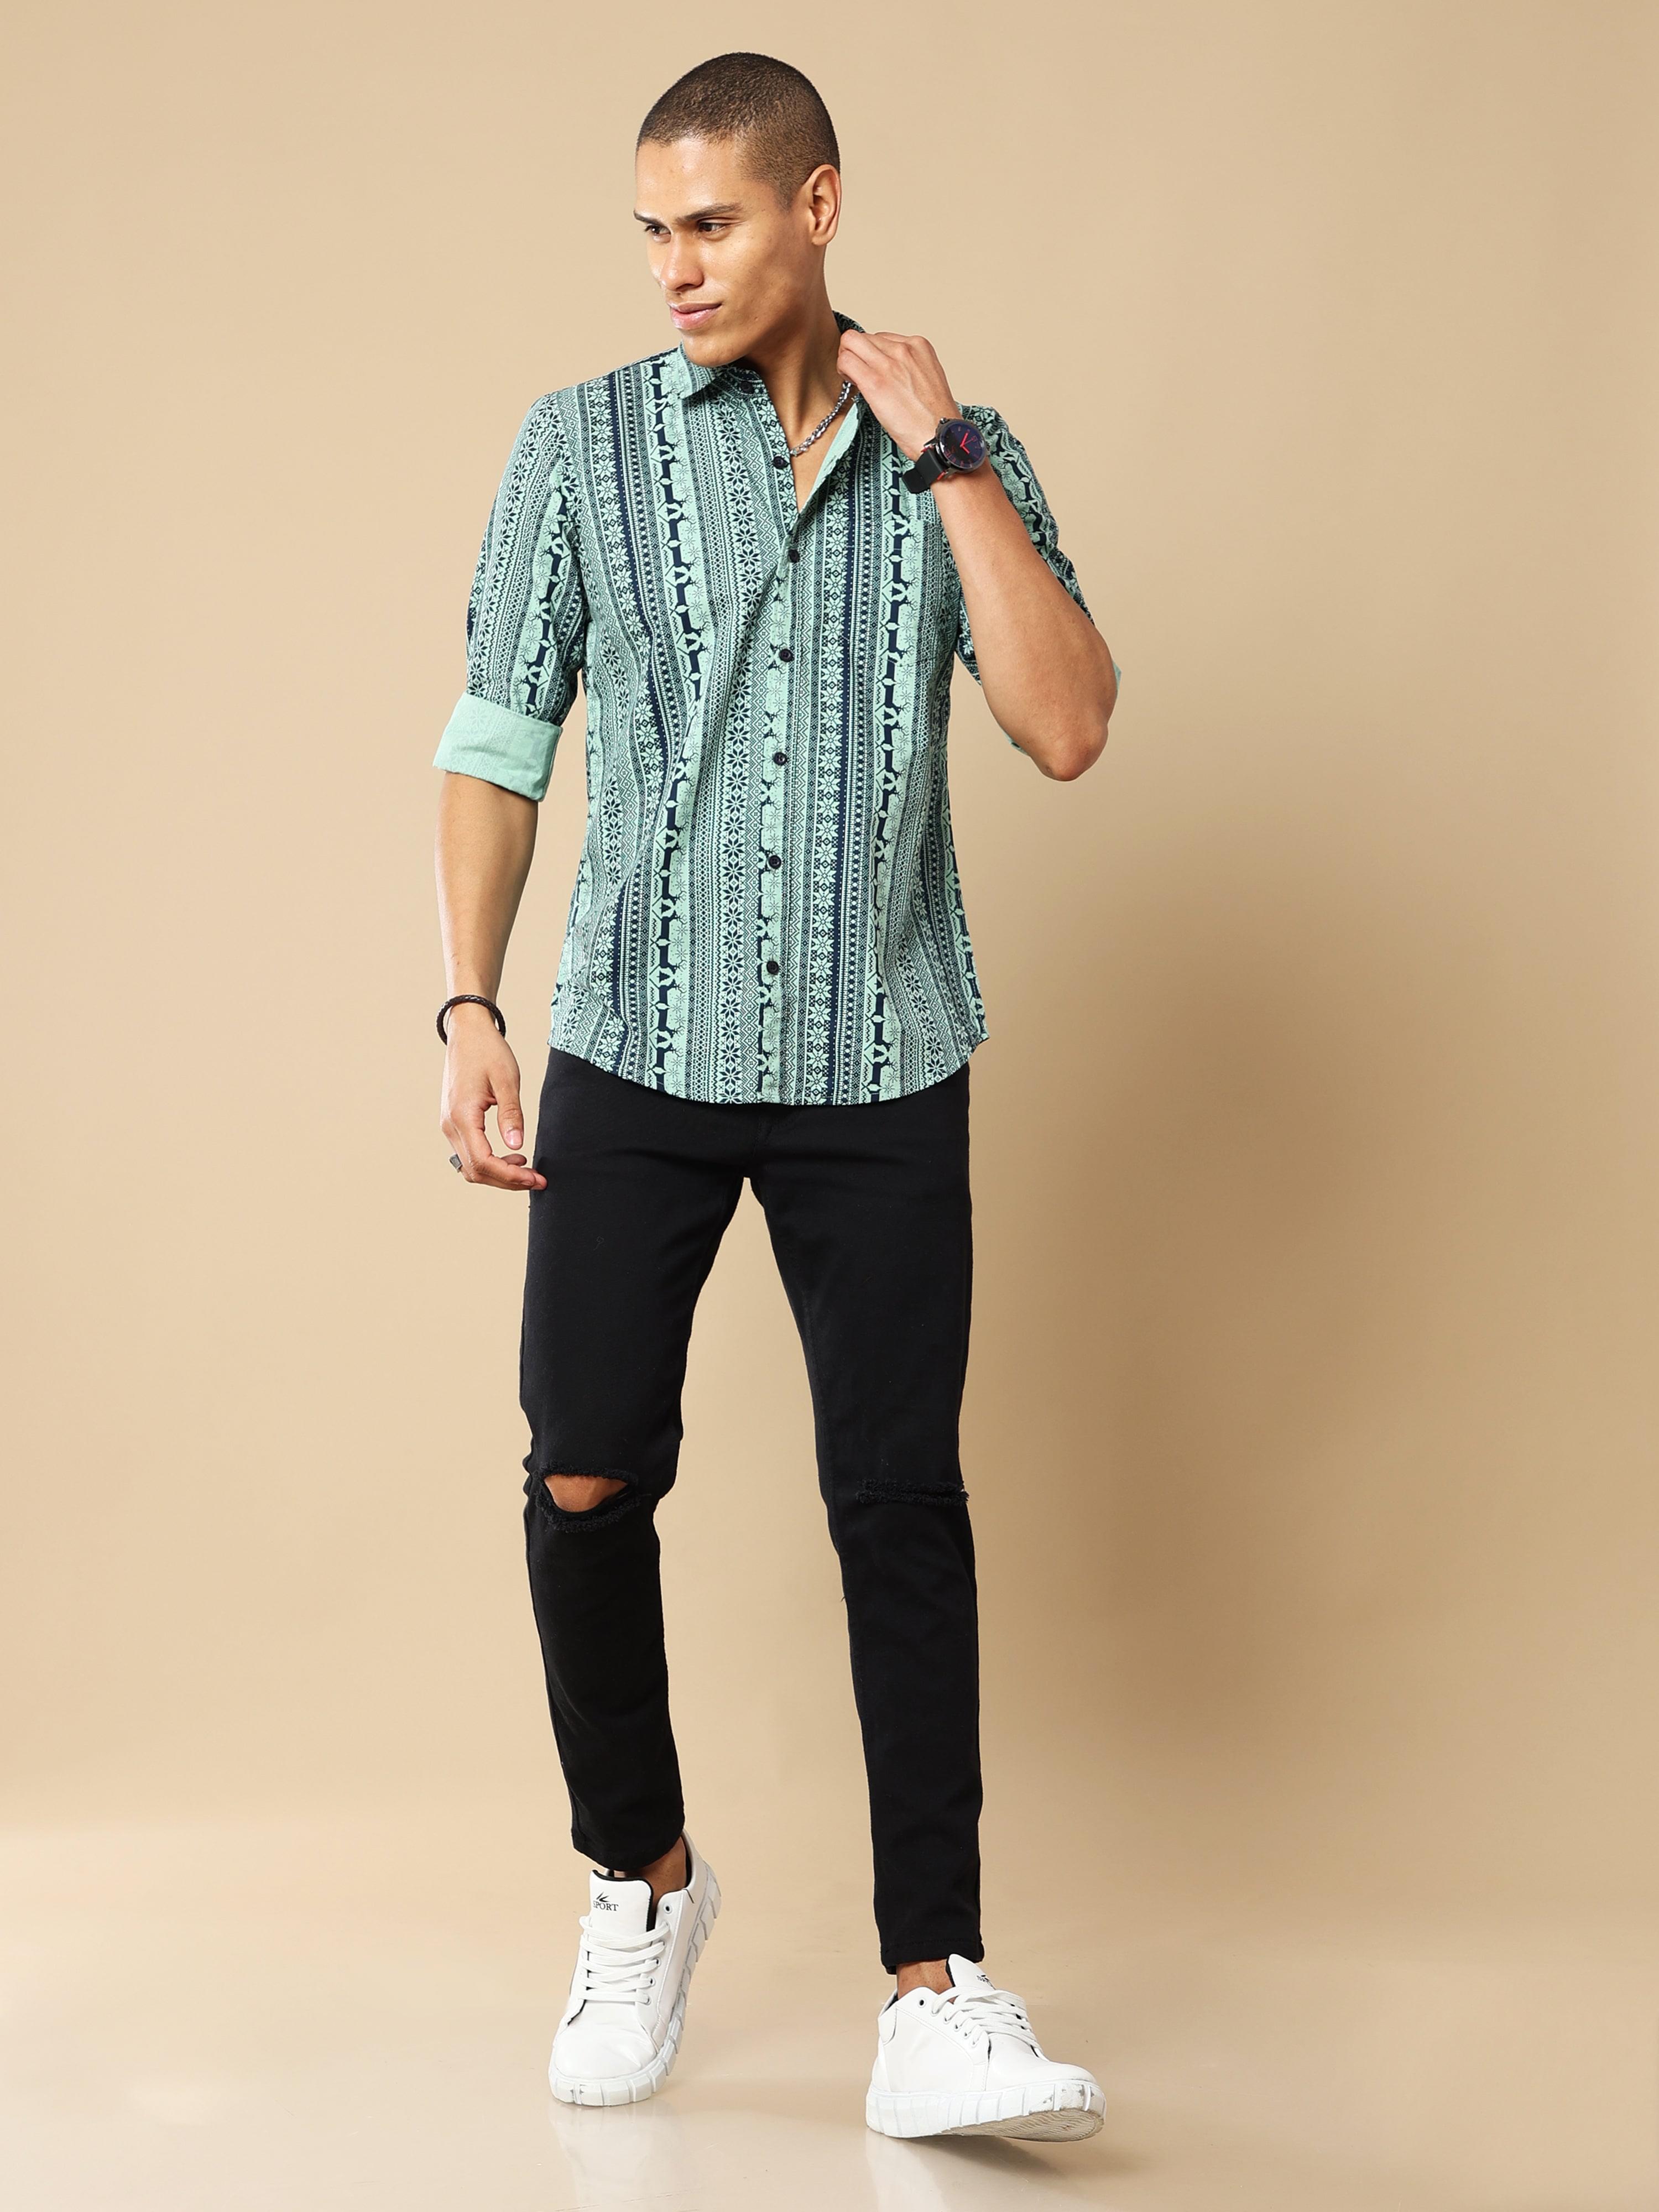 Shop Trendy Casual Animal Printed Shirt Online in IndiaRs. 999.00